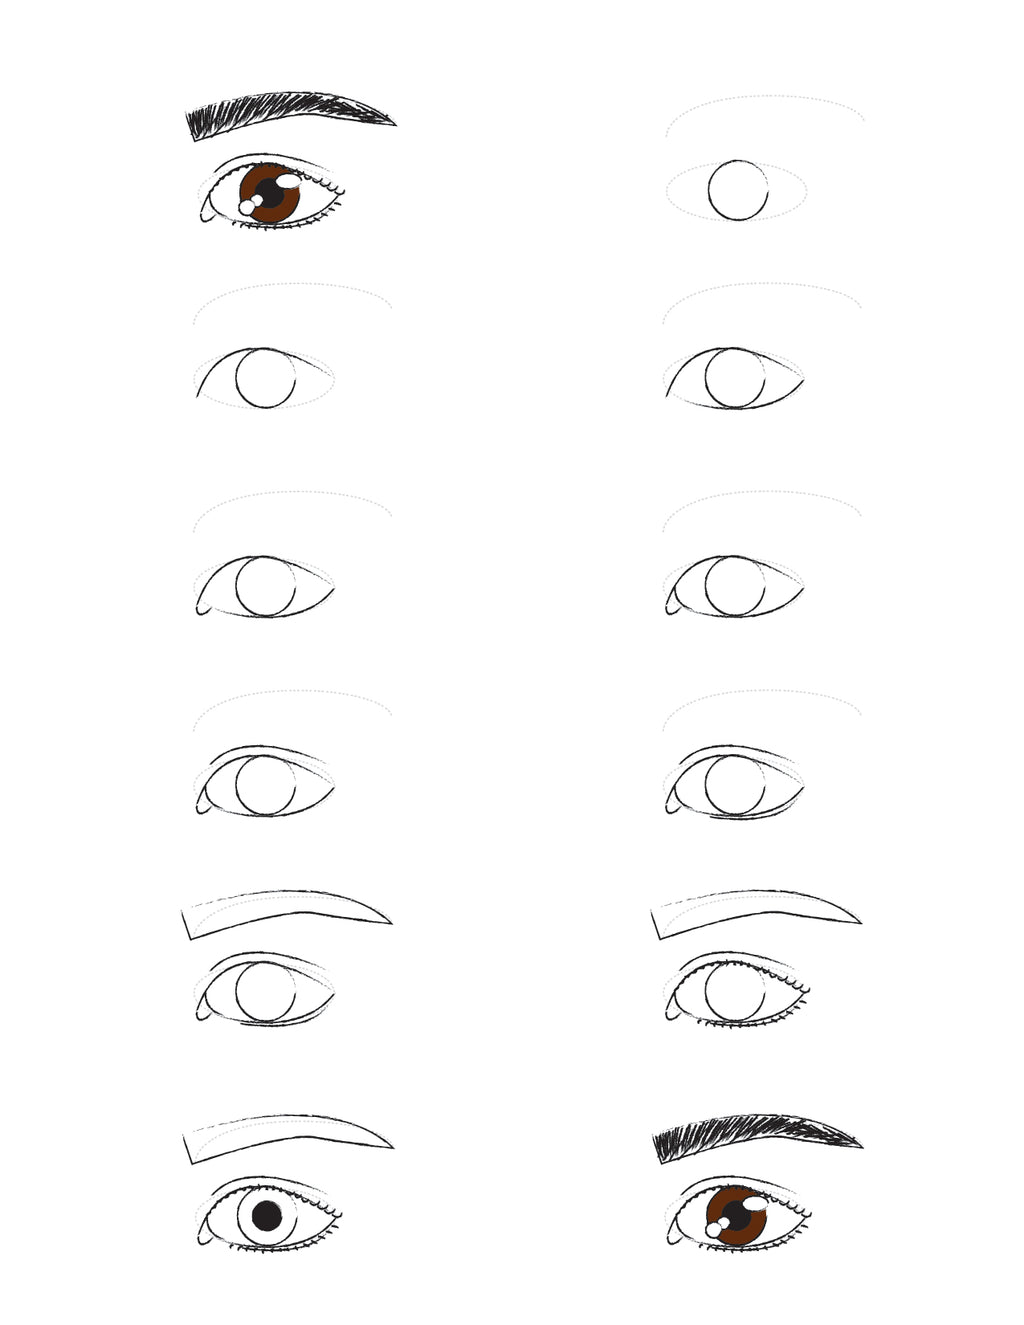 How to draw an eye. Guide.